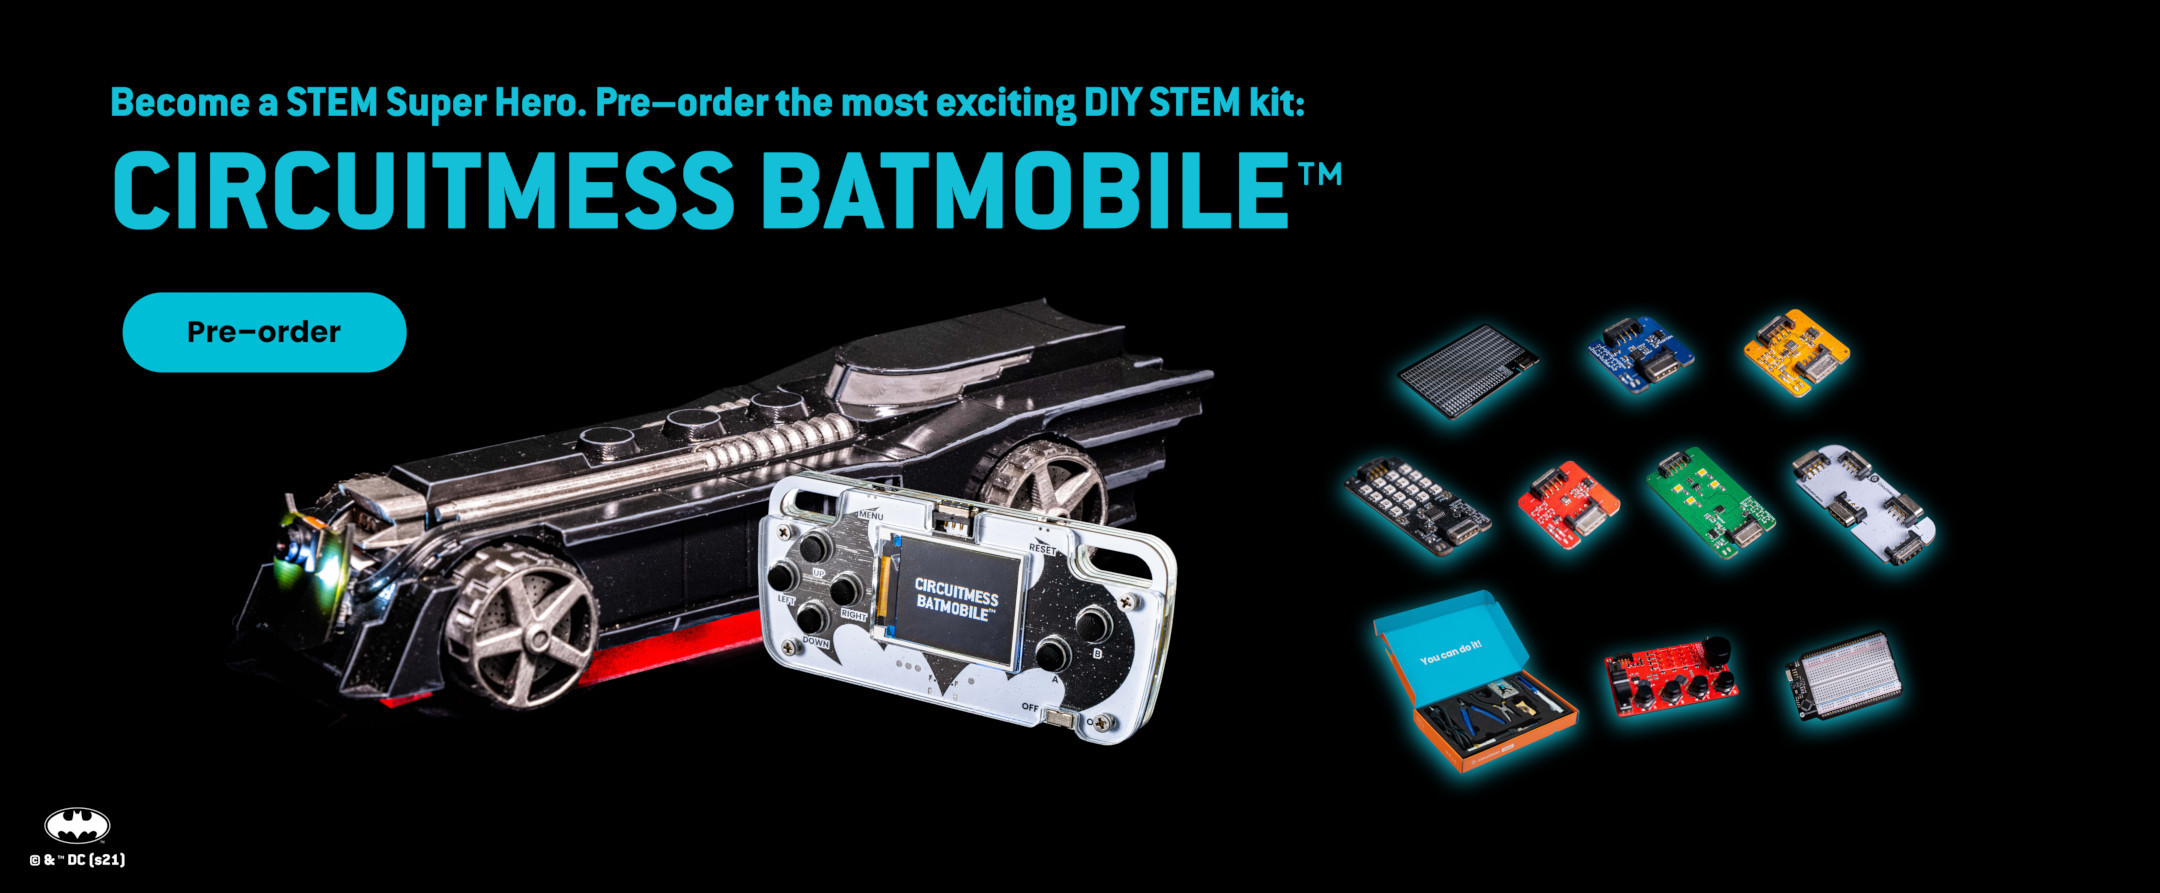 Fullwidth section; Become a STEM Super Hero. Pre-order the most exciting DIY STEM kit: CIRCUITMESS BATMOBILE